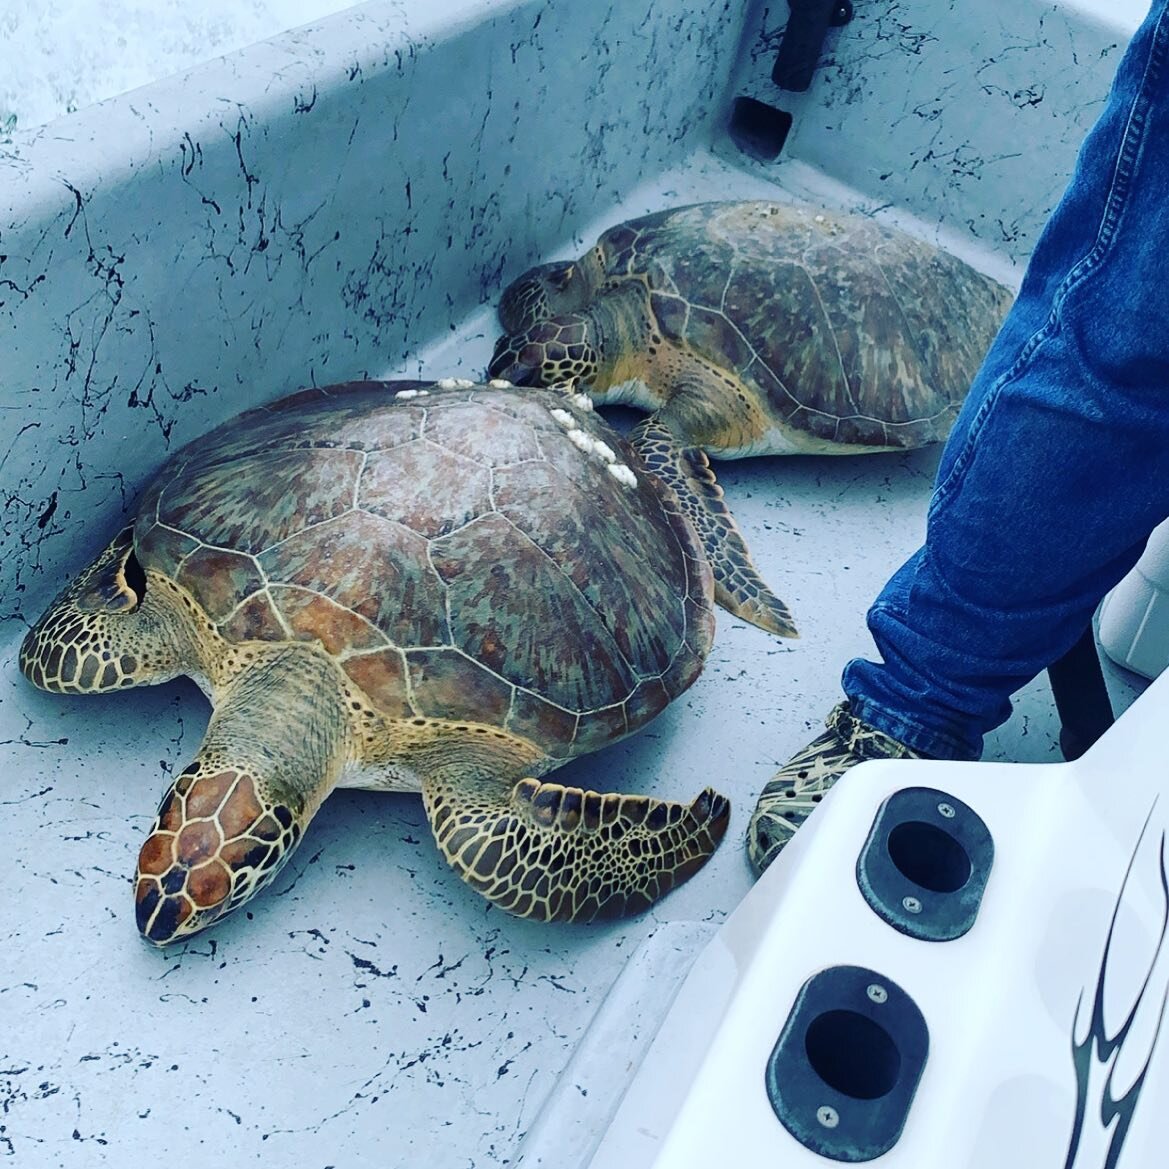 Jimmy, Mason and Trent Simmons rescued  some sea turtles today. 

https://www.facebook.com/ARKWildlifeRehab/